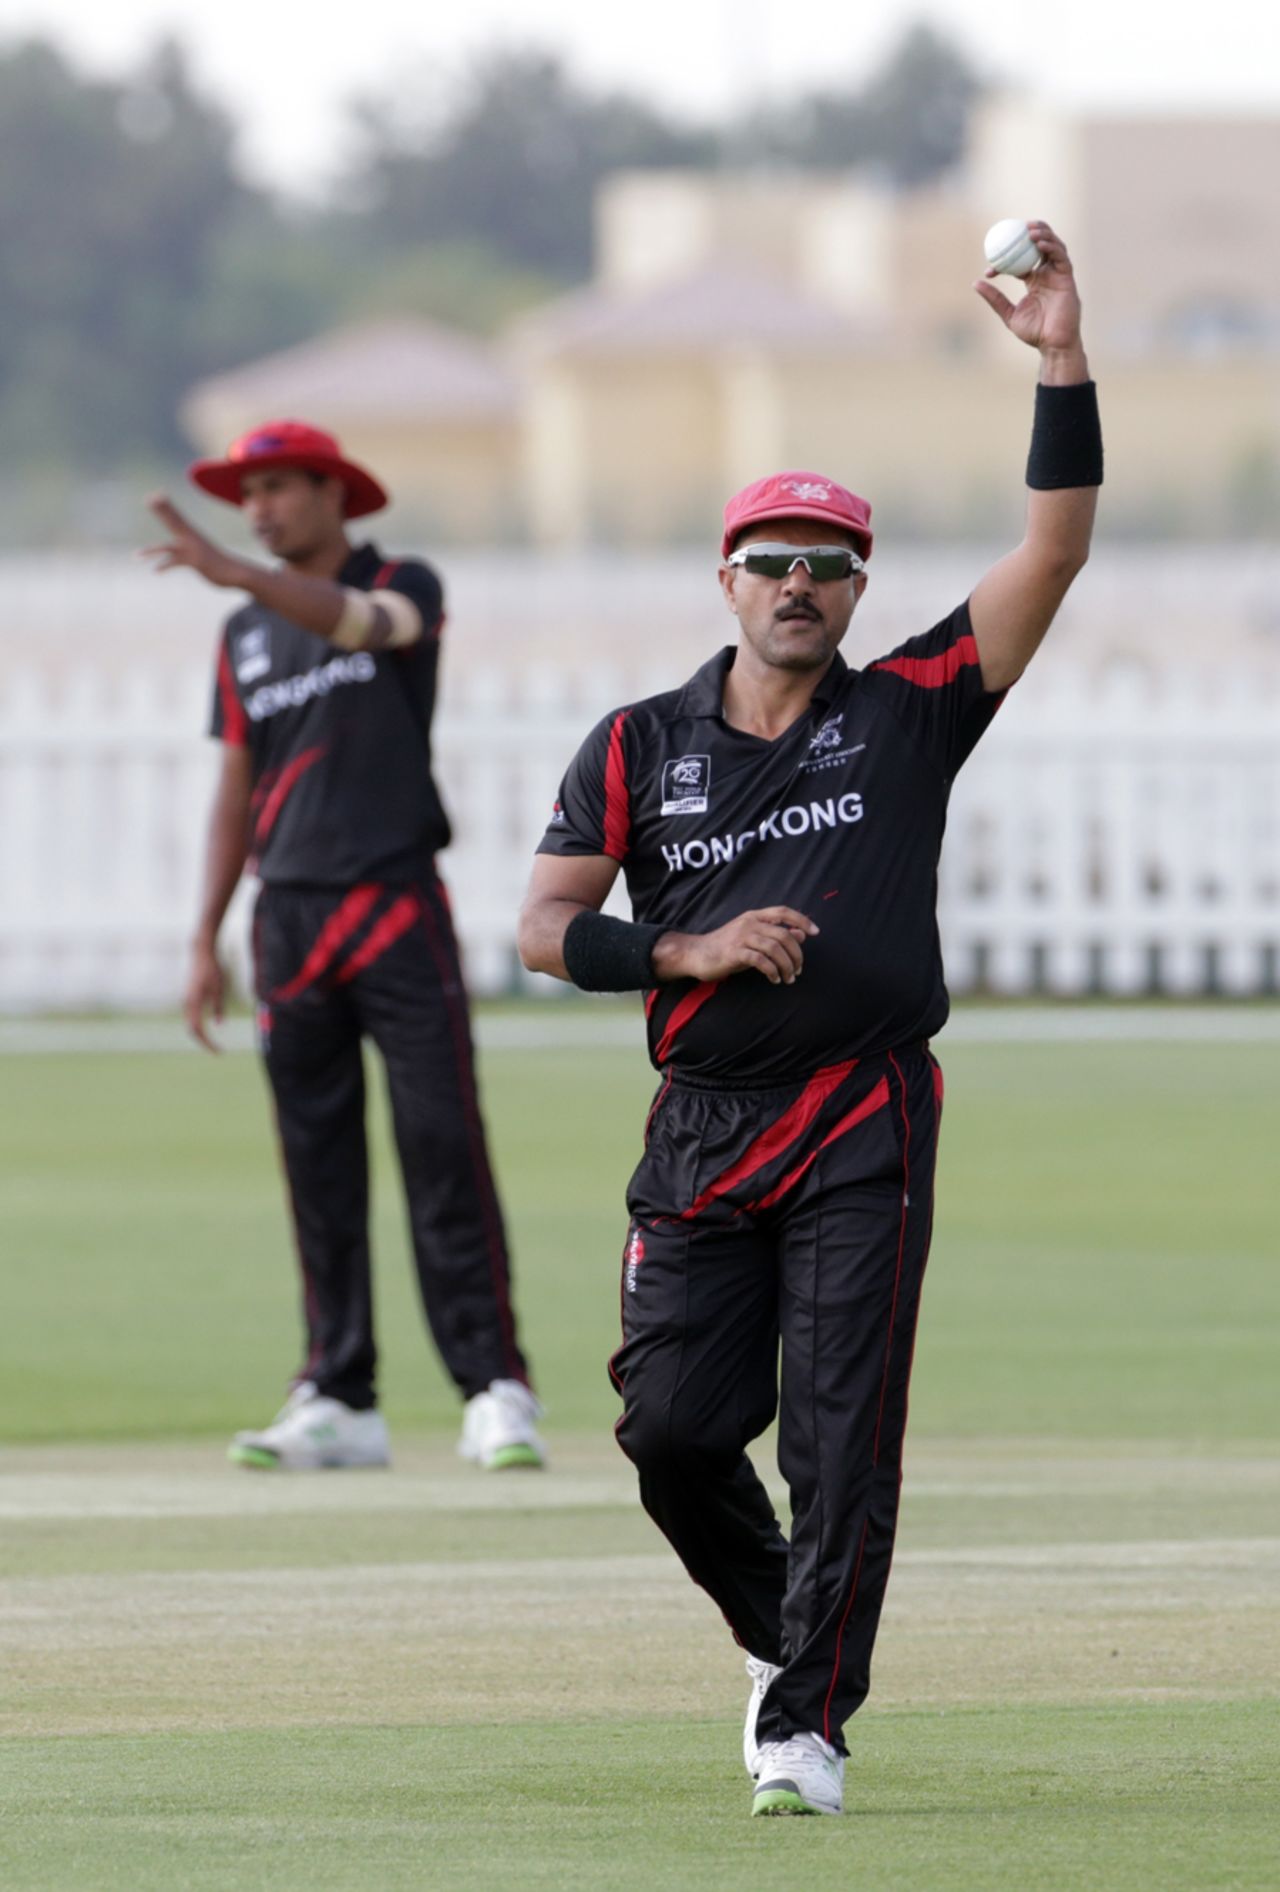 Moner Ahmed of Hong Kong warms up in the match between Uganda and Hong Kong at the ICC World Twenty20 Qualifiers at the Zayed Cricket Stadium on November 16, 2013 in Abu Dhabi, United Arab Emirates. (Photo by Graham Crouch-IDI/IDI via Getty Images)